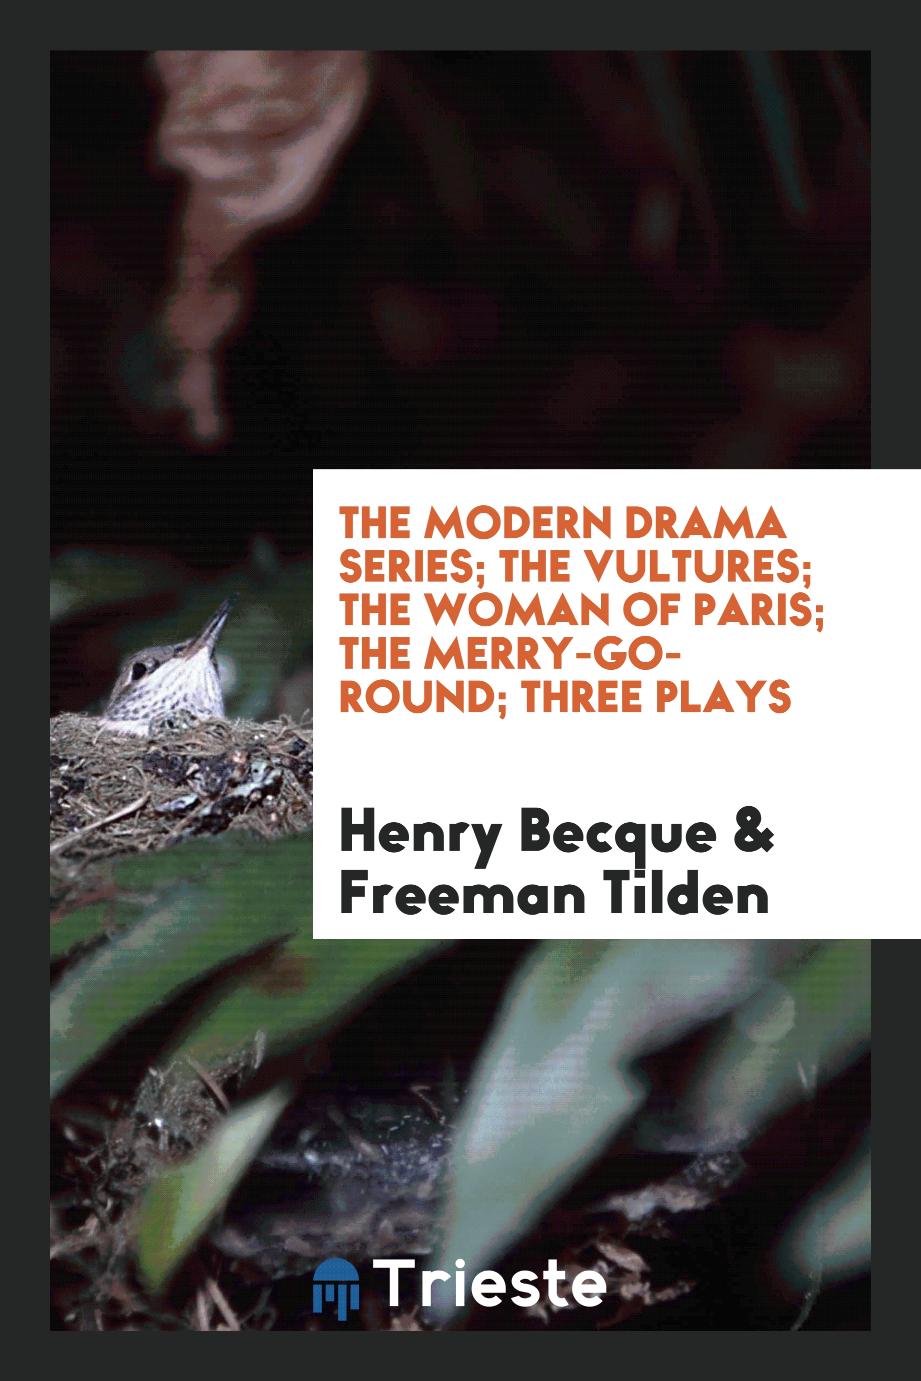 The Modern Drama Series; The Vultures; The Woman of Paris; The Merry-Go-Round; Three Plays